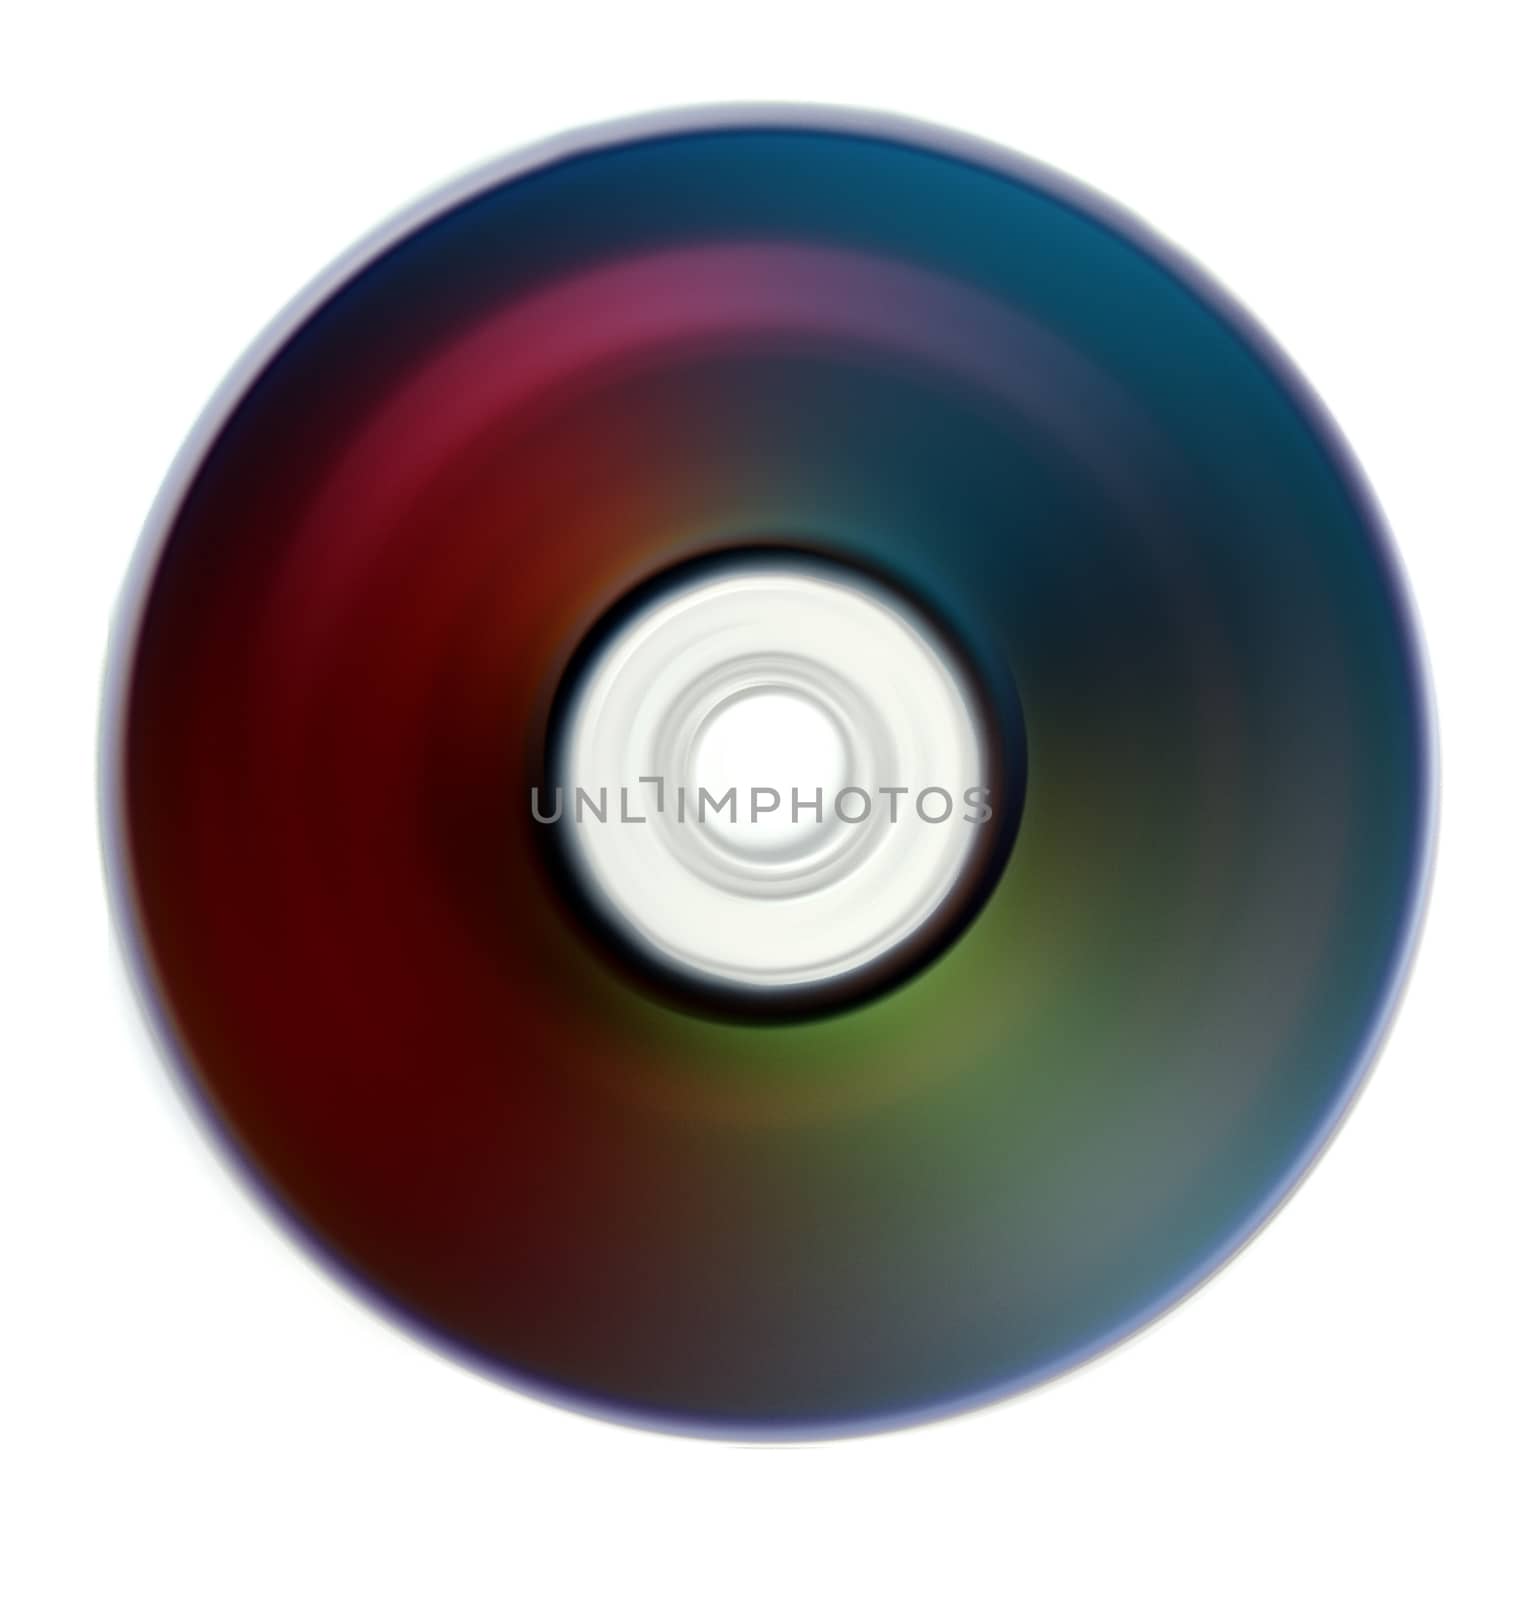 A metaphorical image of a spinning compact disc or DVD on an isolated white studio background.